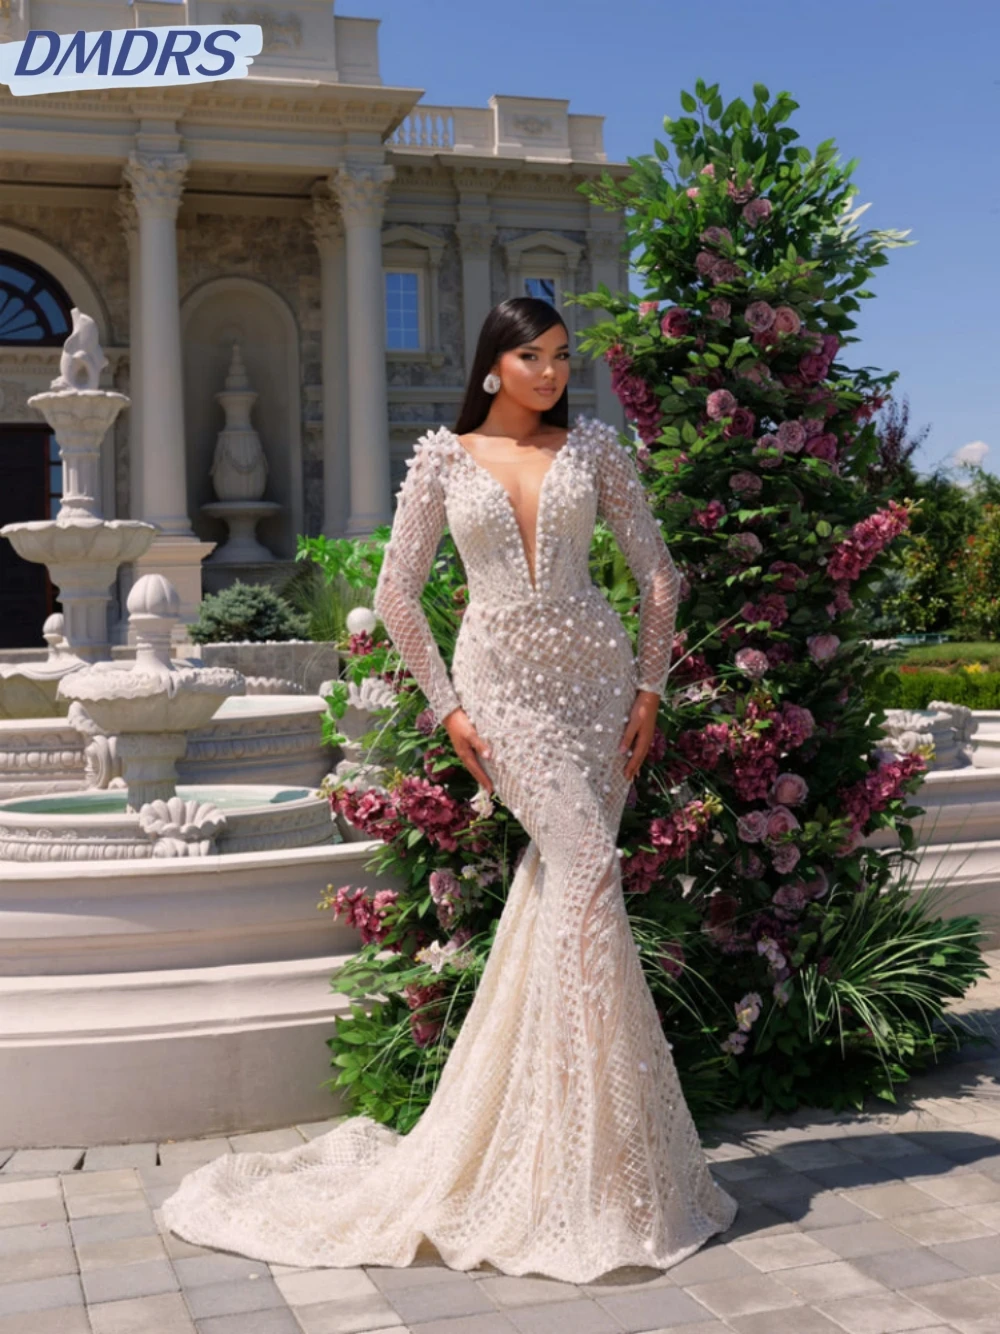 

Simple O-neck Long Sleeve Prom Gown Sparkly Beads Crystal Evening Dress Luxury Pearls Long Cocktail Dresses Robe De Mariée